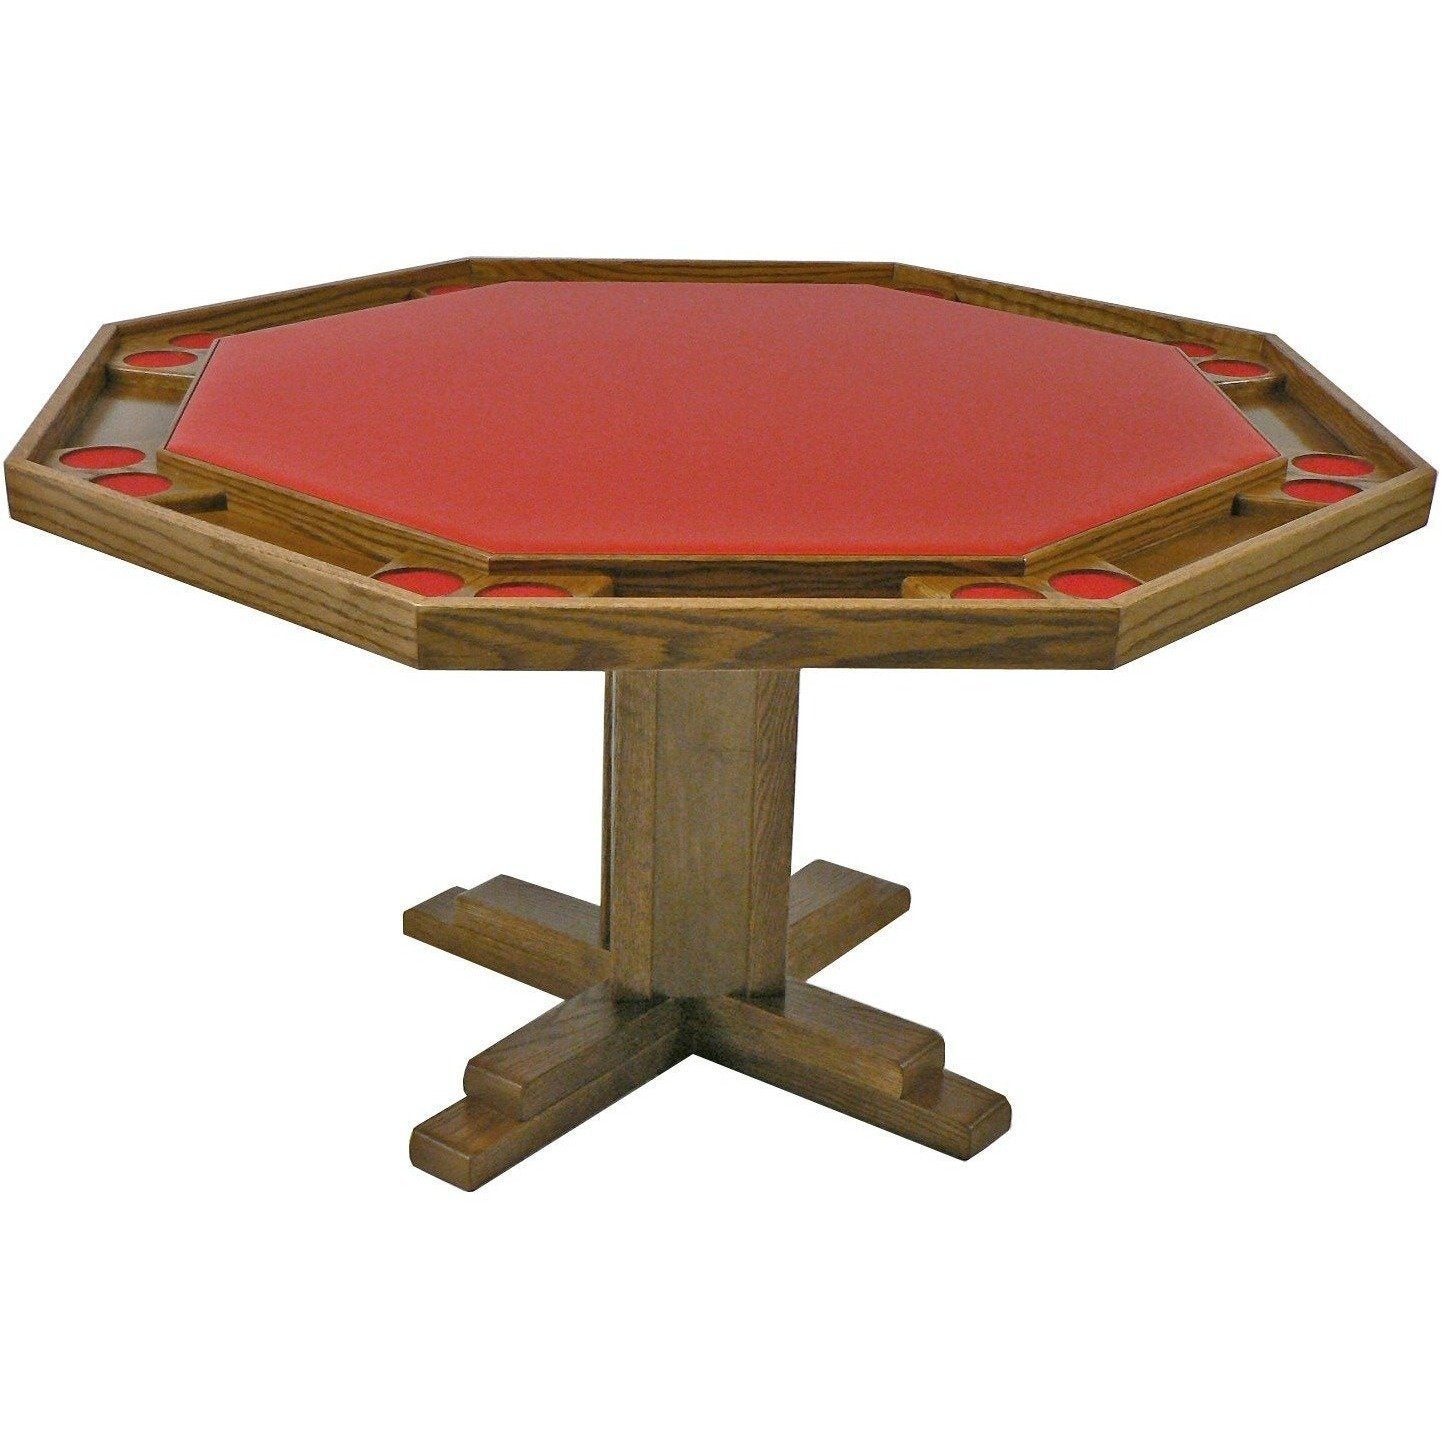 Kestell 52" Oak Octagon Poker Table with Pedestal Base 8 Person - Just Poker Tables